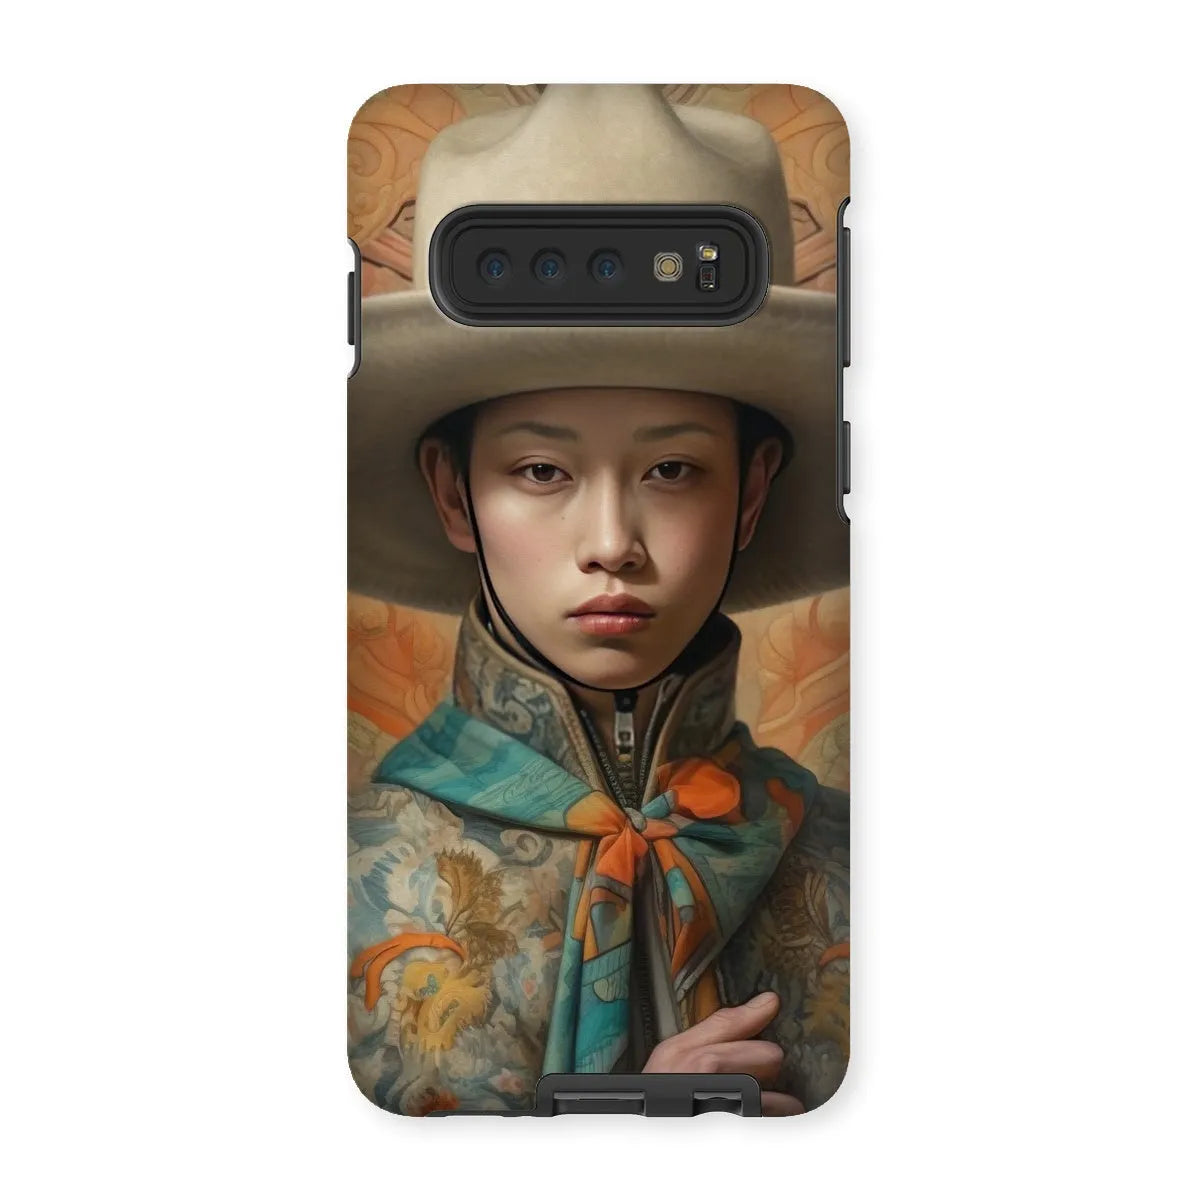 Xiang - Gaysian Chinese Cowboy Aesthetic Art Phone Case - Samsung Galaxy S10 / Matte - Mobile Phone Cases - Aesthetic